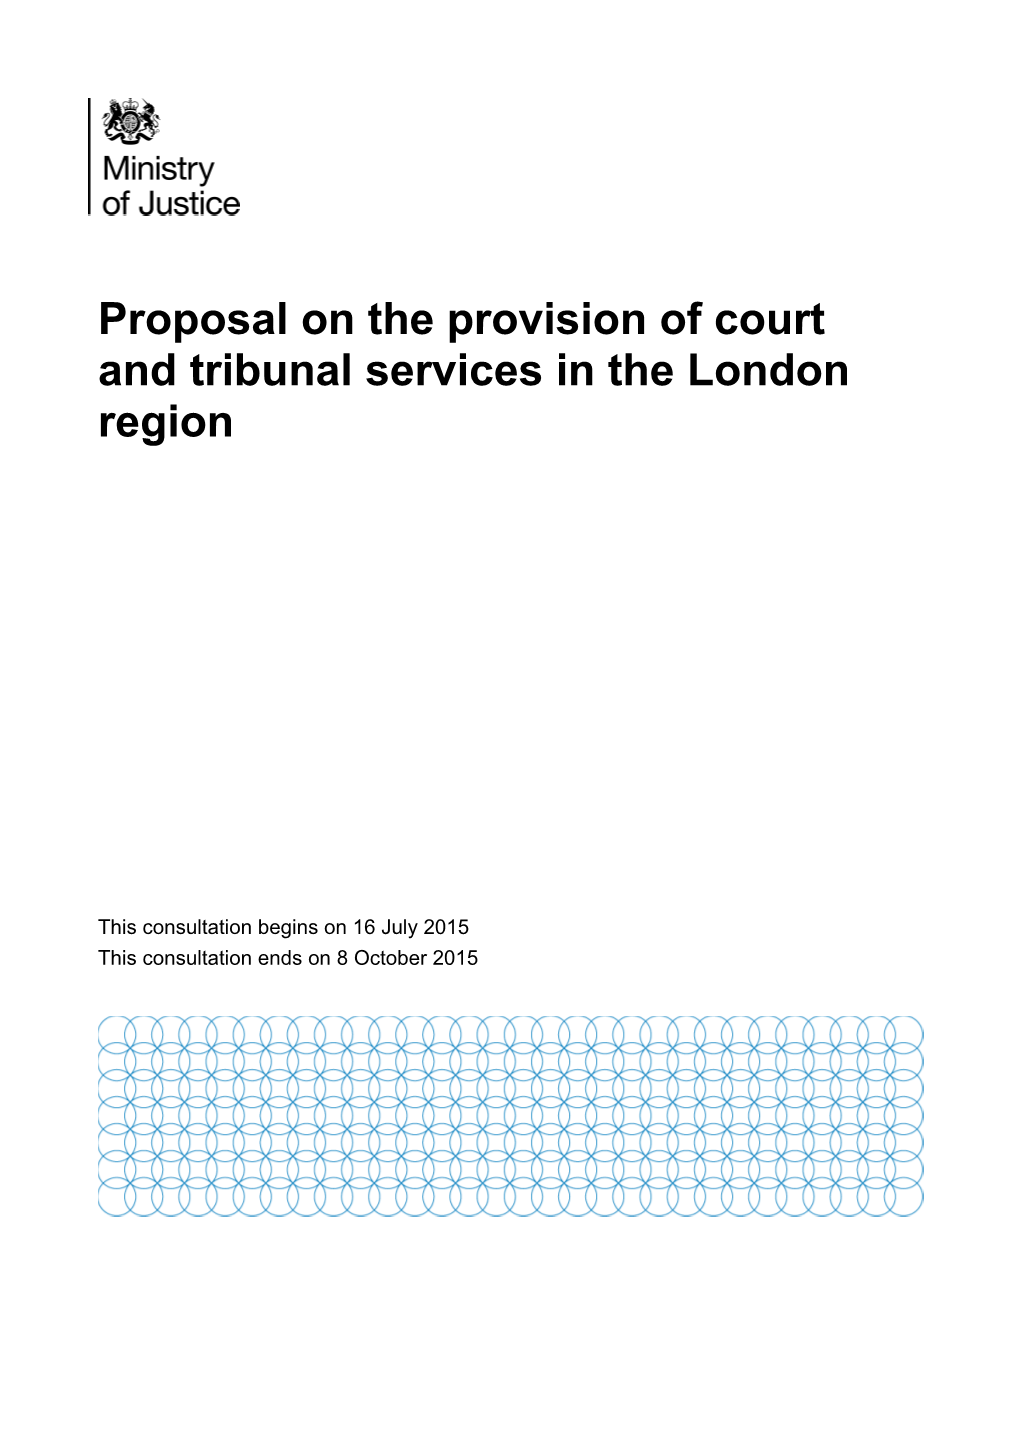 Ministry of Justice Consultation Paper